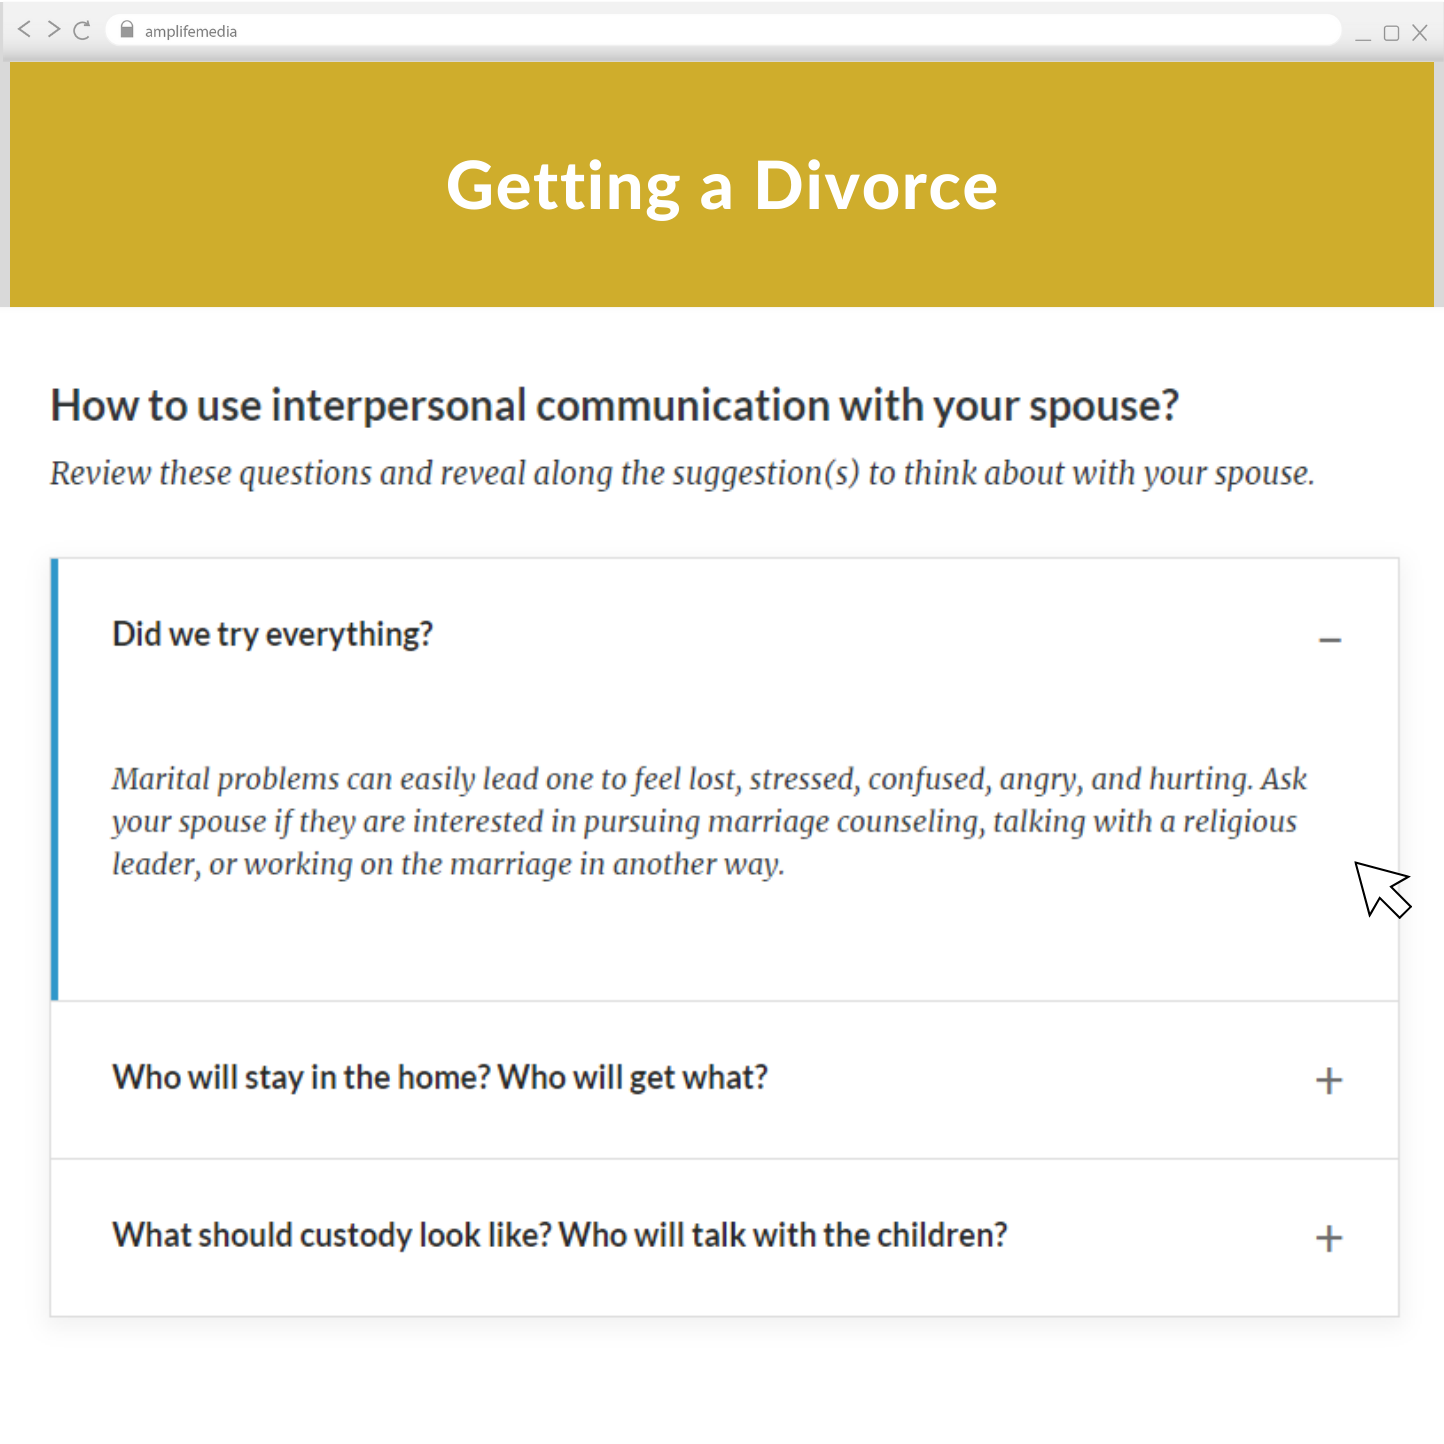 Subscription to Wellbeing Media: Getting a Divorce MT 122